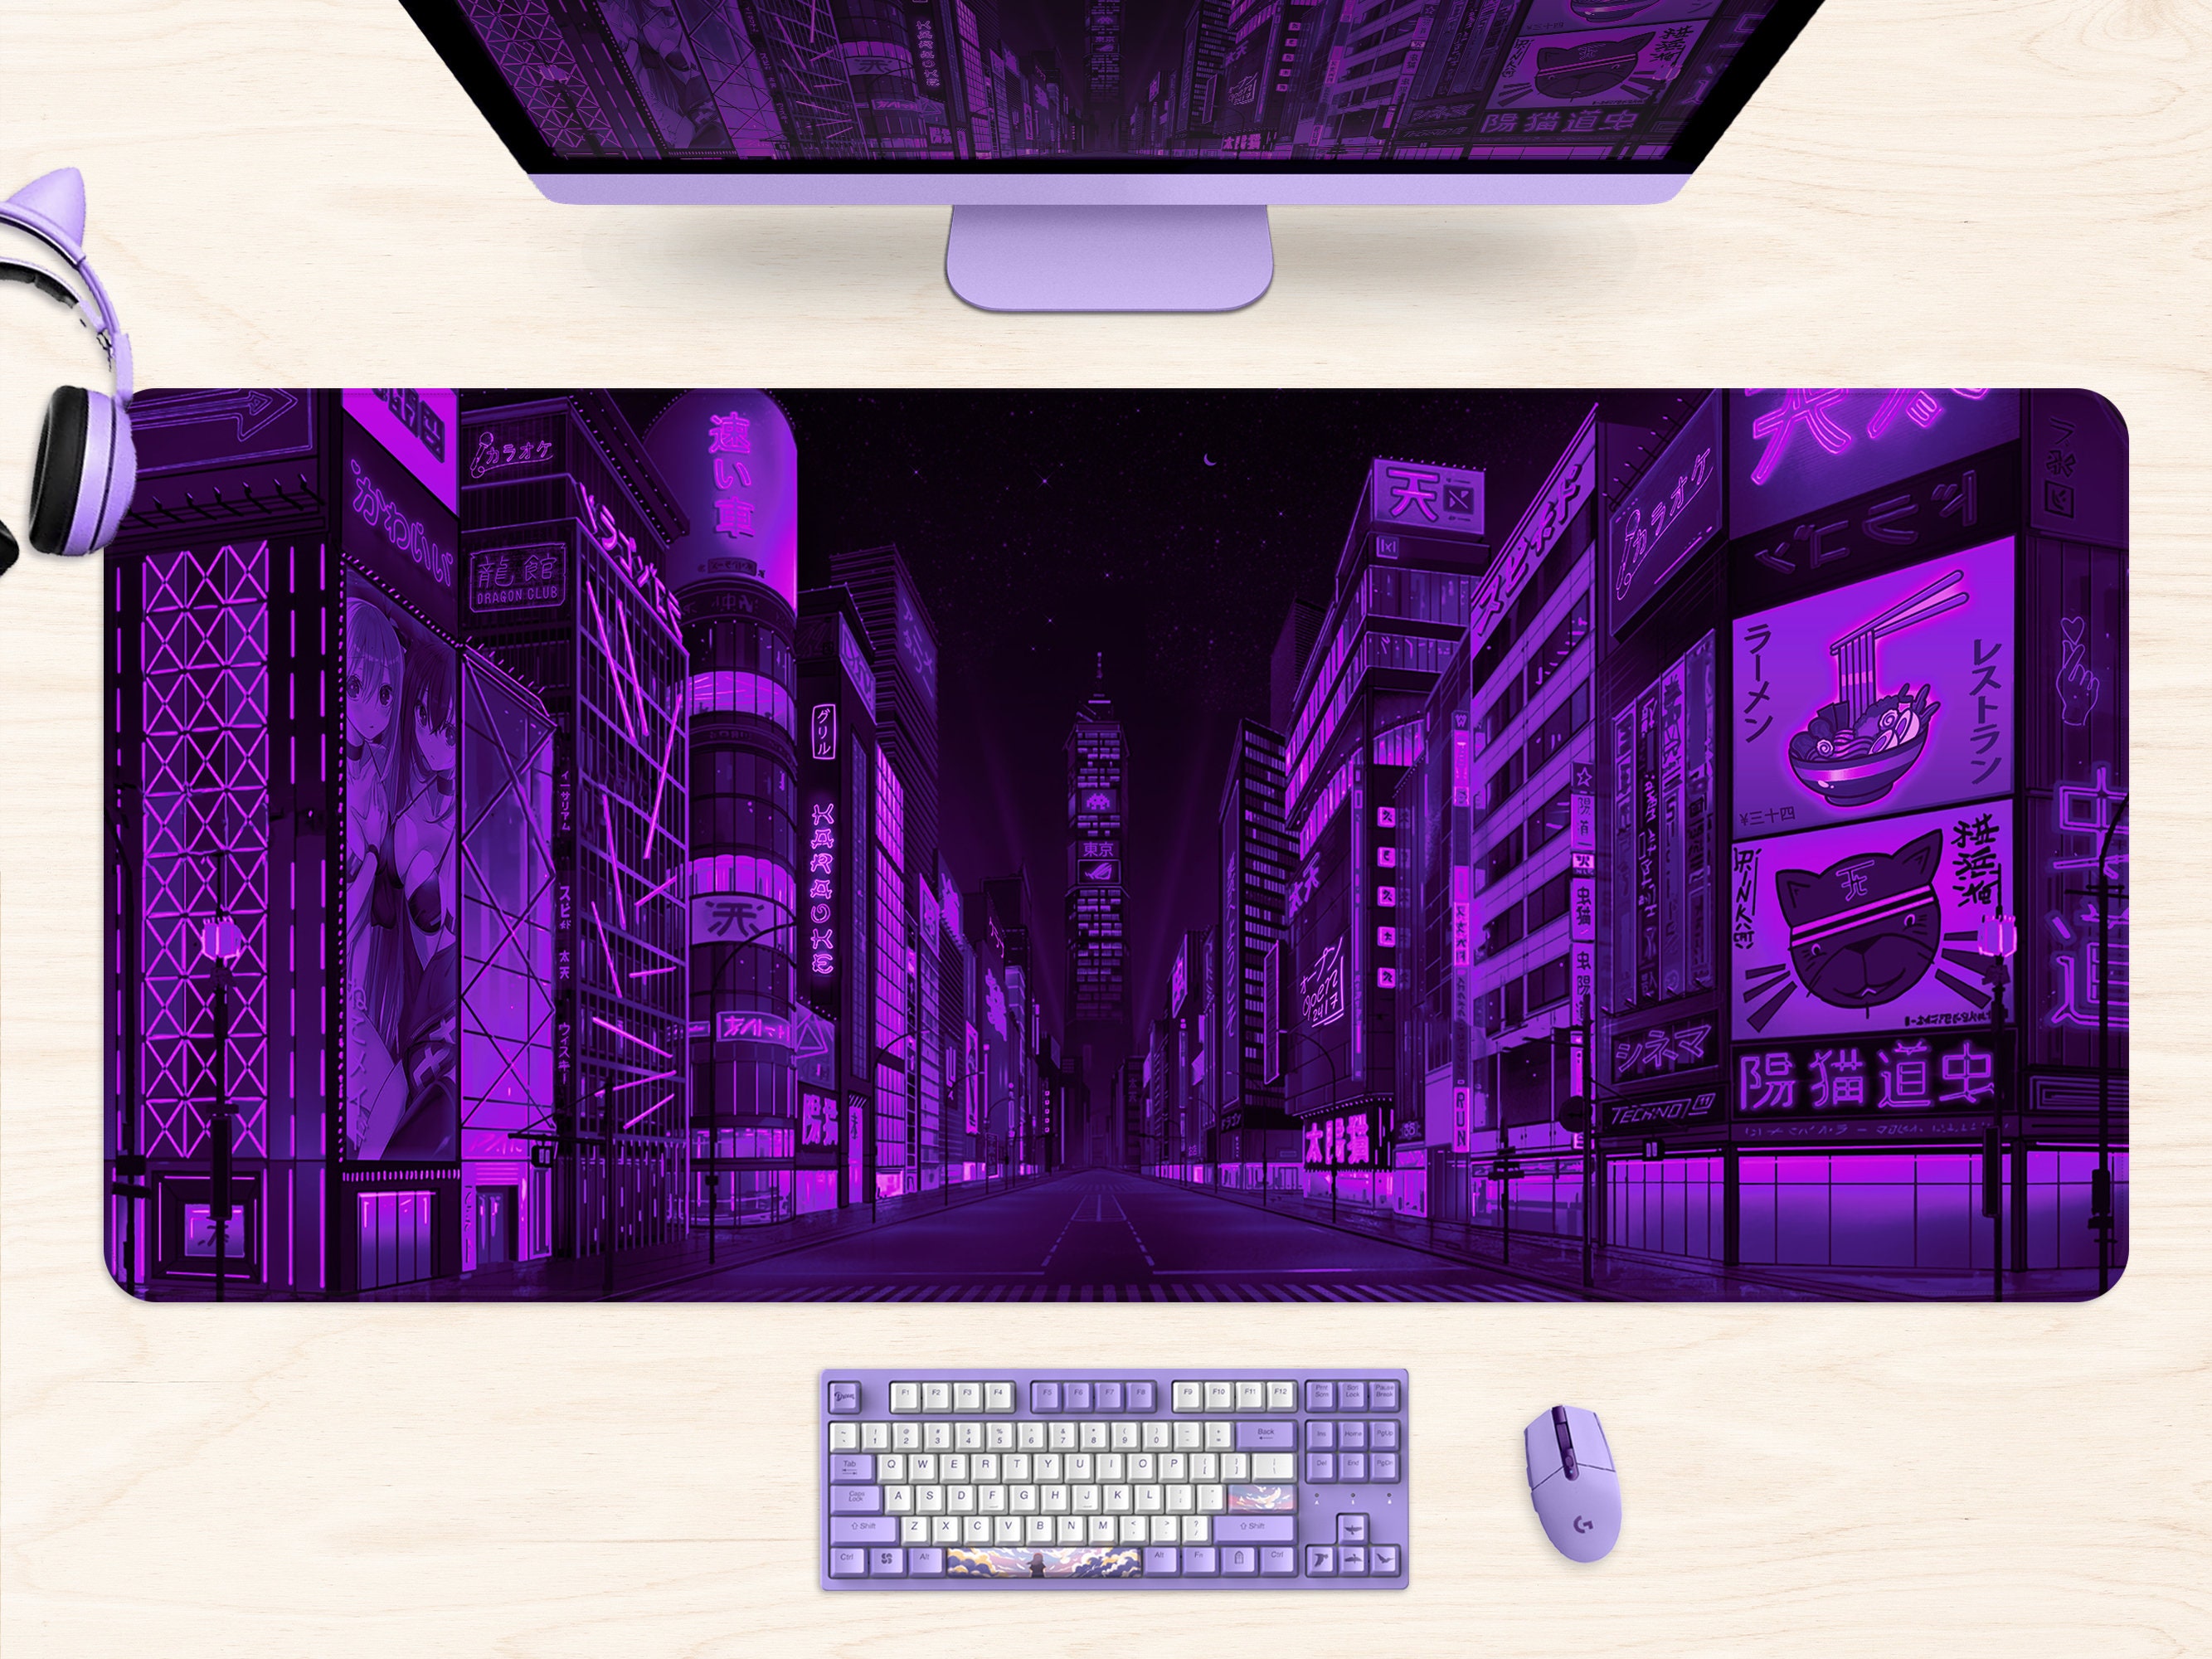 CREATE WORK PLAY Gaming Desk Mat – Outstanding Design, Better Mouse  Accuracy and More Comfort – Neon Collection Desk Mats for Gaming (Vivid  Neons)